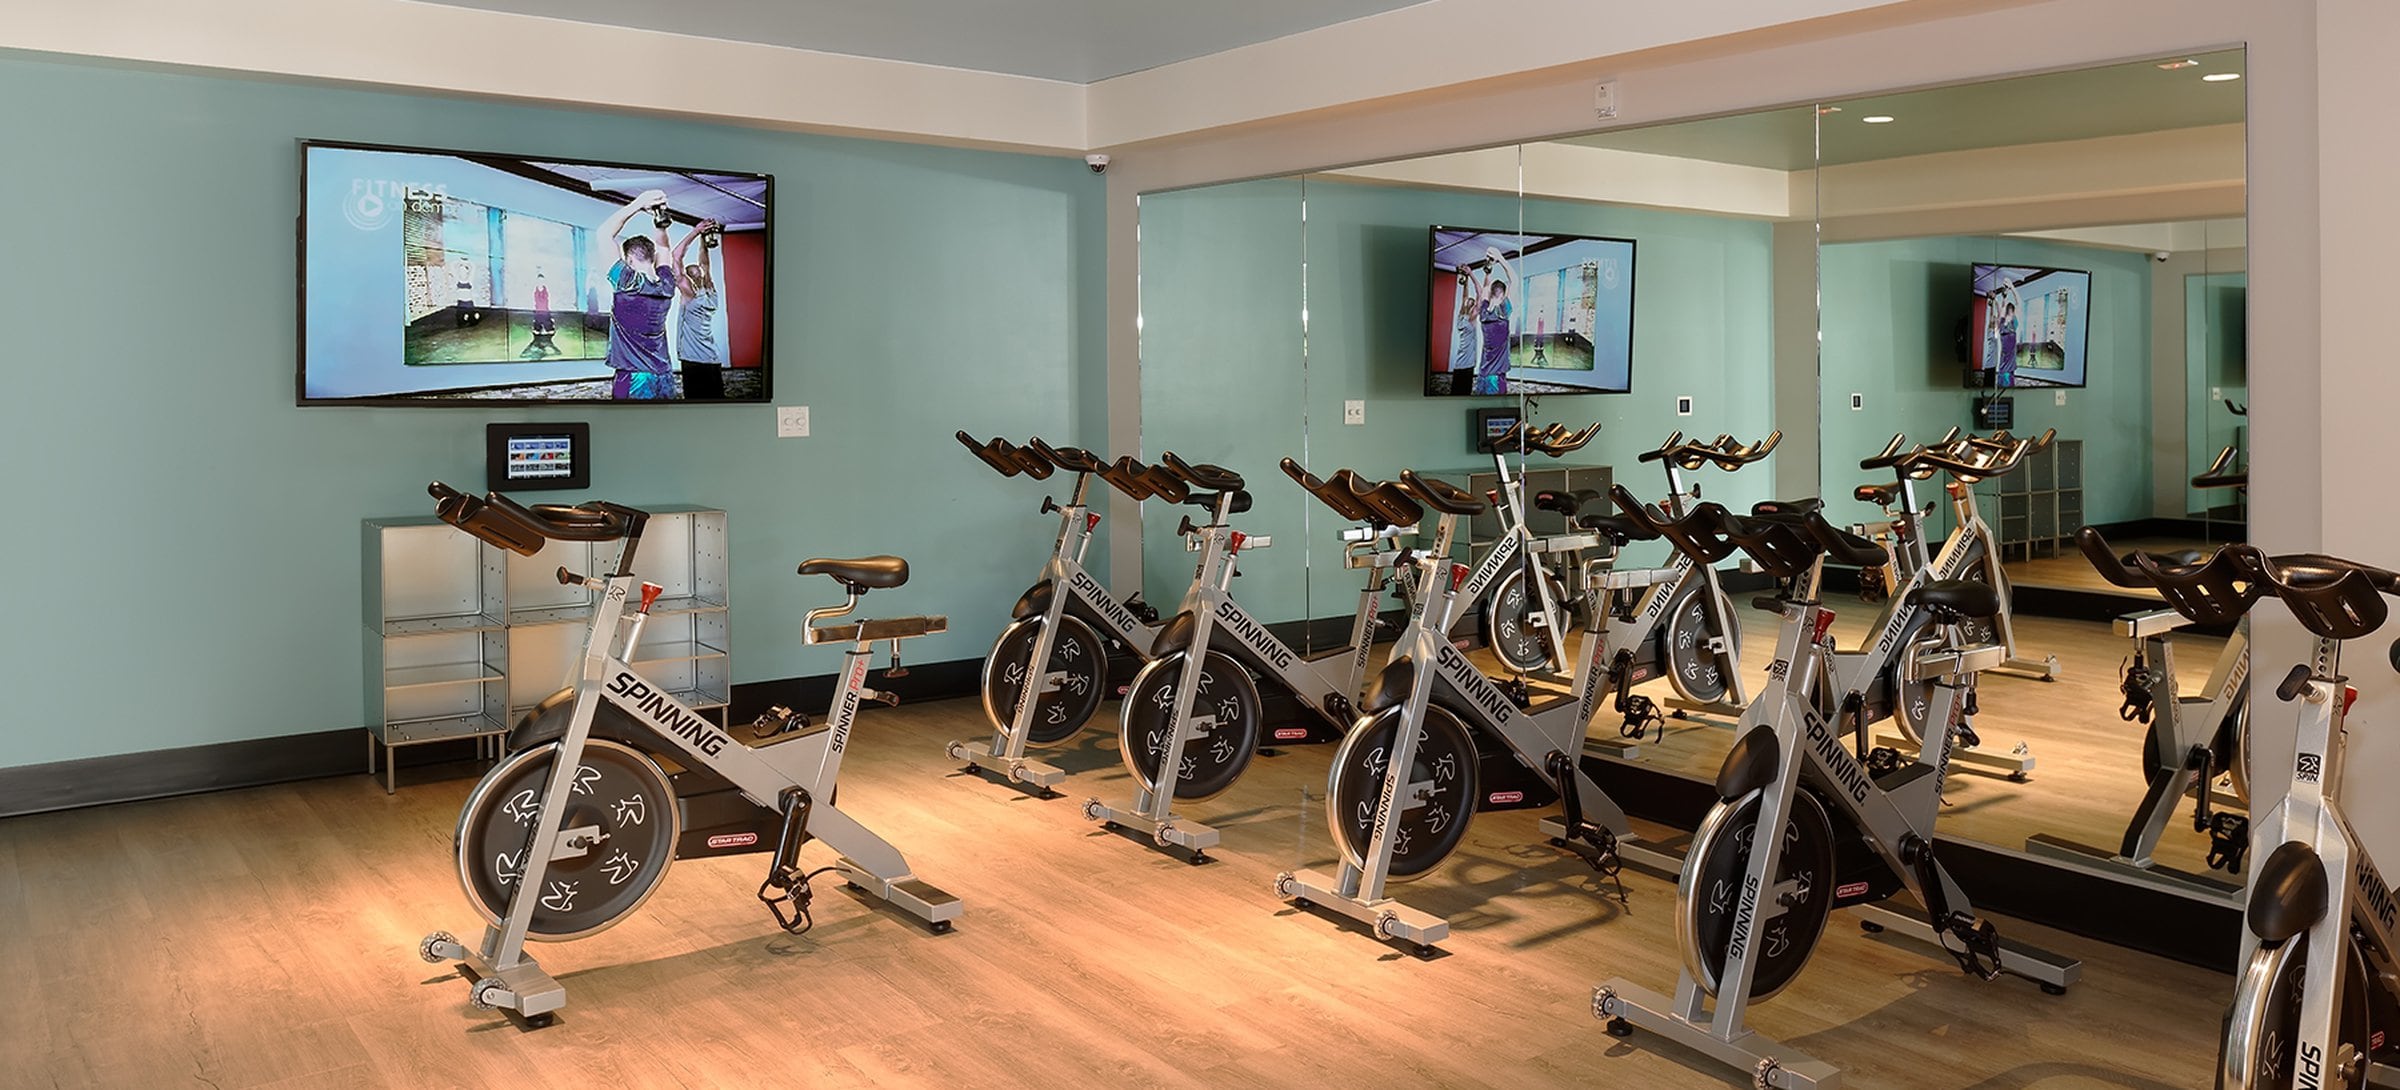 Phase I Flex Studio with Spin Bikes and Fitness on Demand Programming